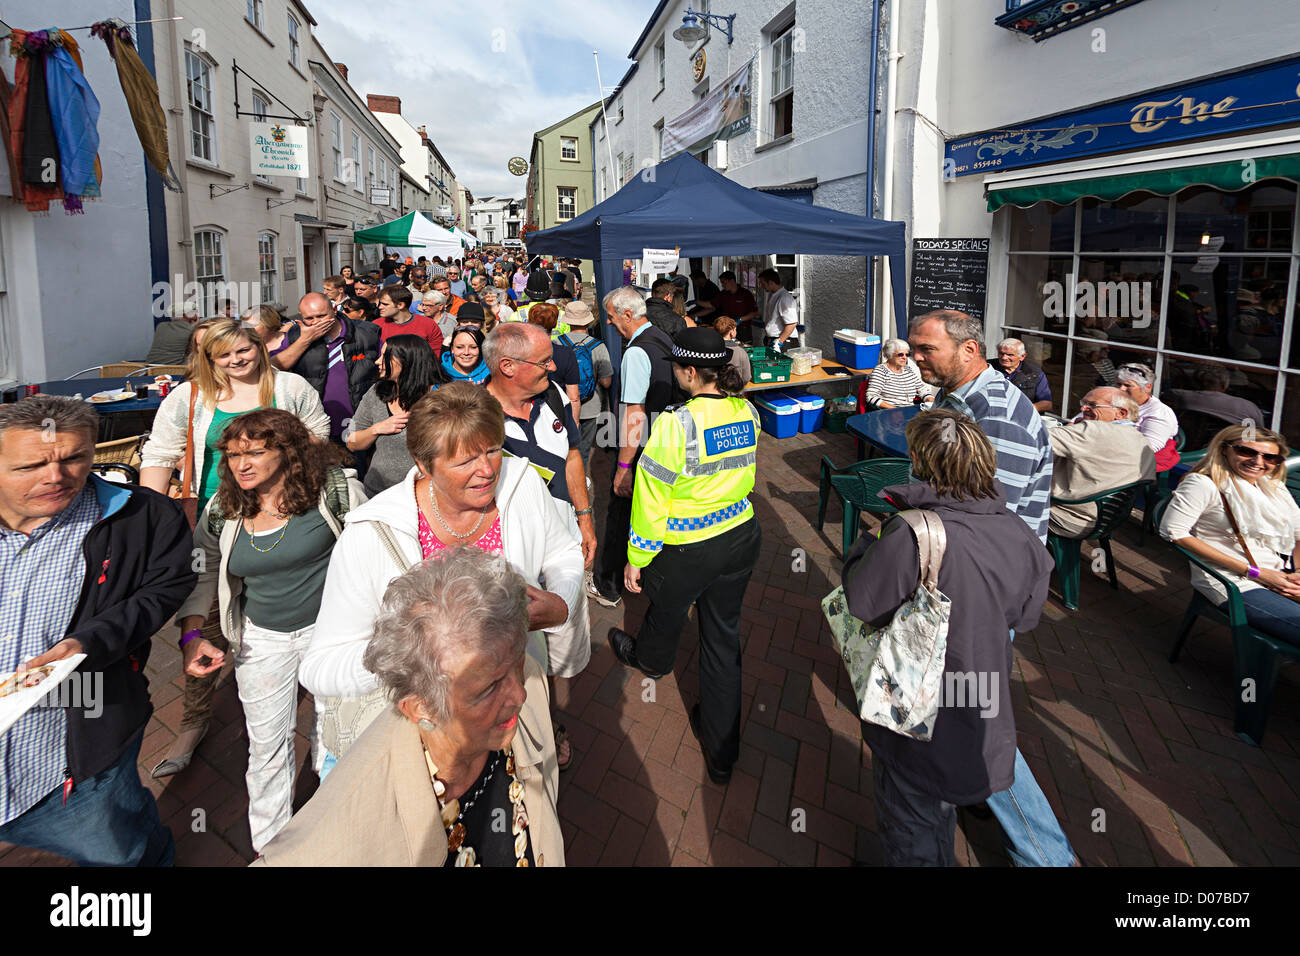 Crowds with police officer at Abergavenny Food Festival, Wales, UK Stock Photo